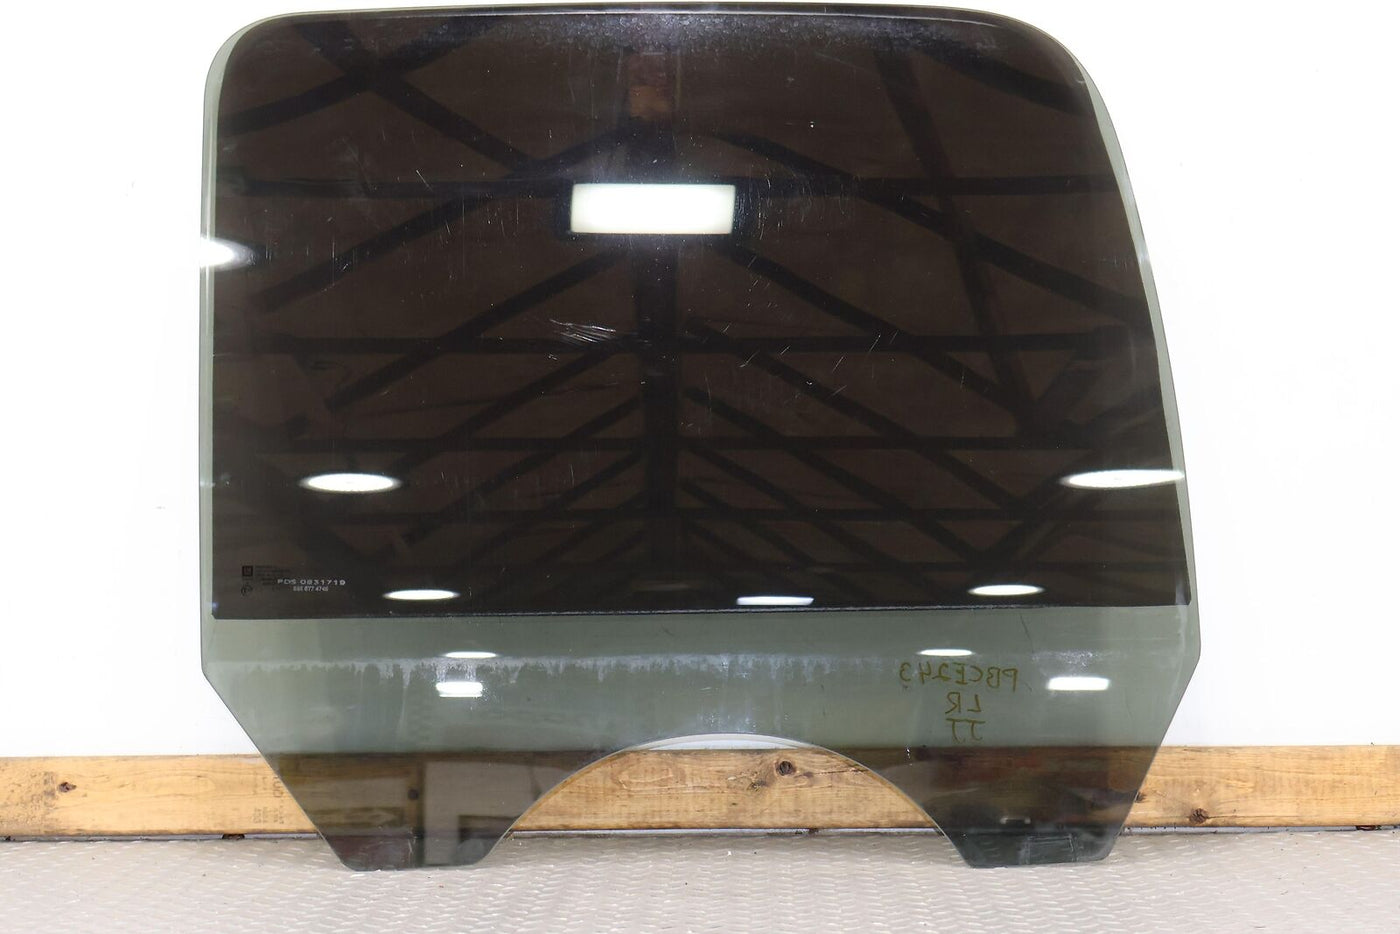 07-13 Chevy Avalanche Rear Left LH Door Glass Window (Privacy & Self Tint)